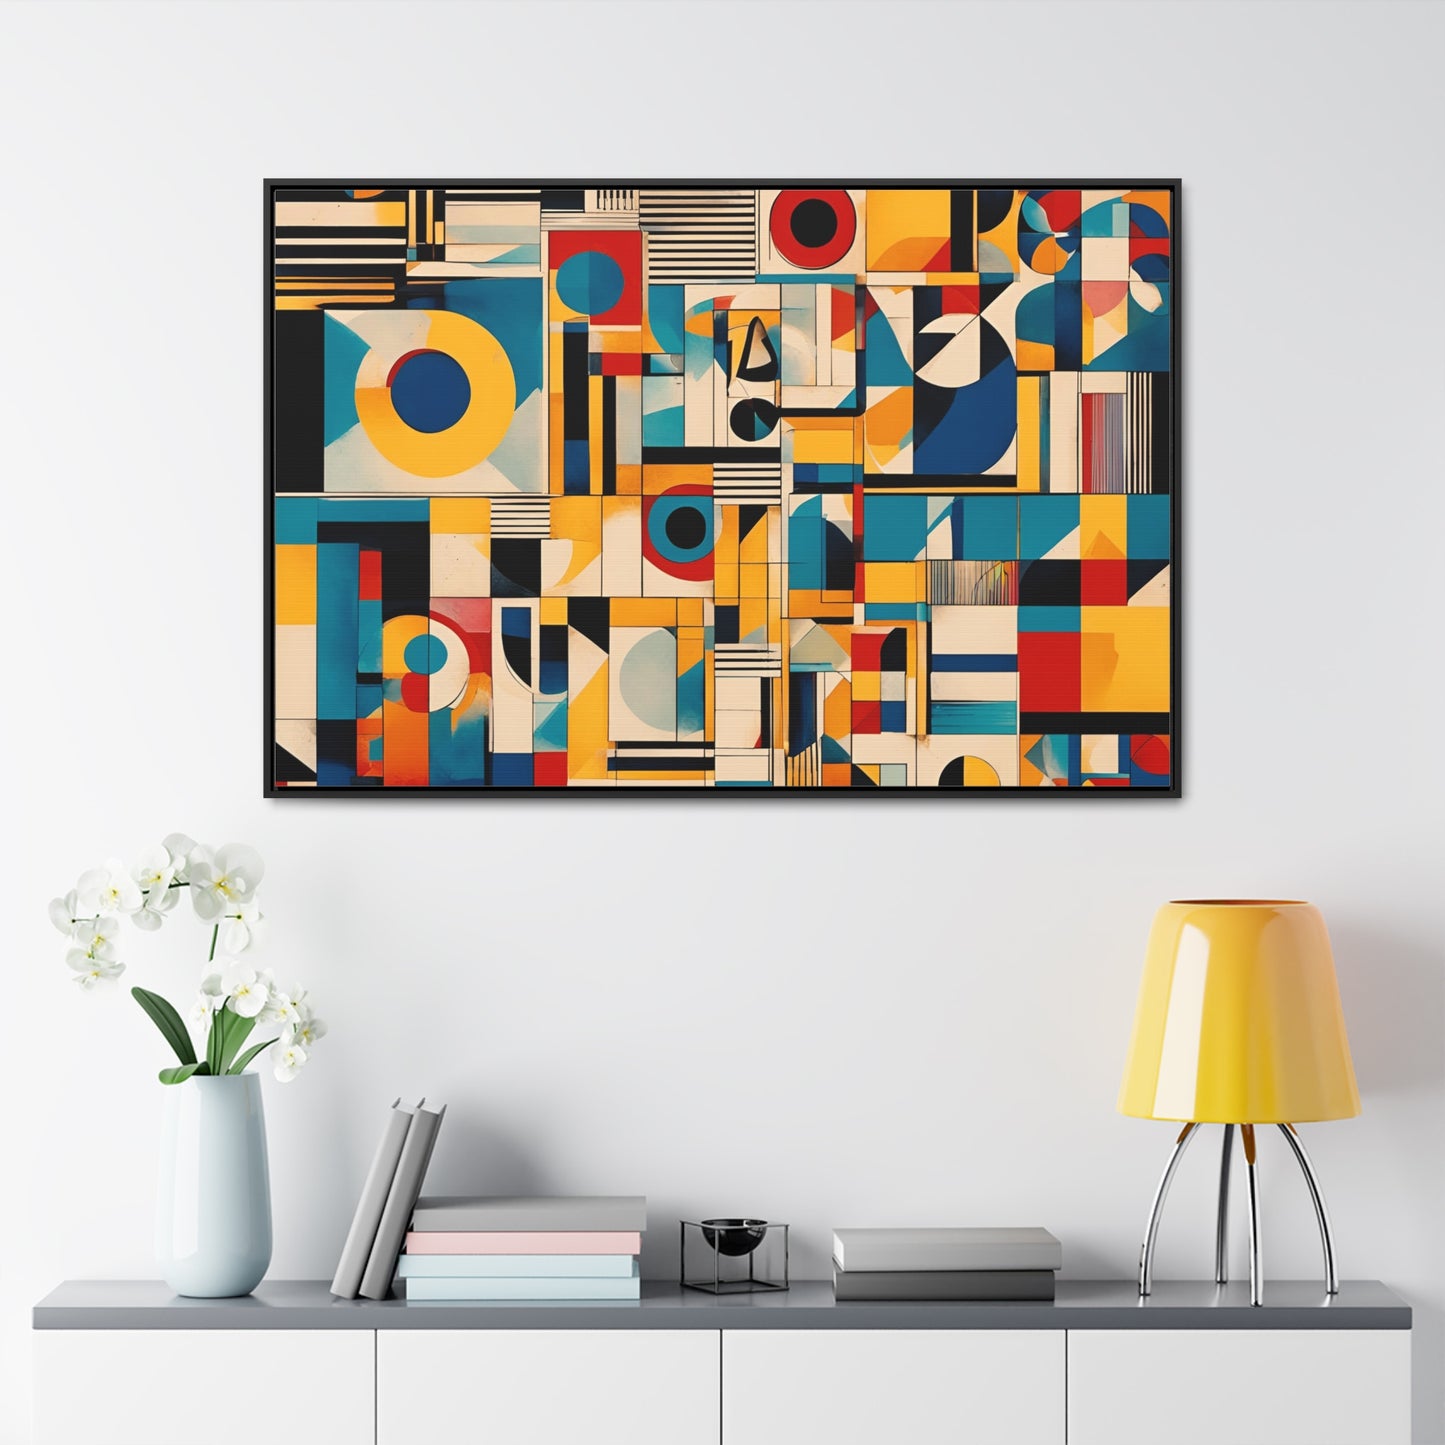 Bold Mid Century Modern Wall Art Print on Canvas in a Floating Frame 48x32 hung